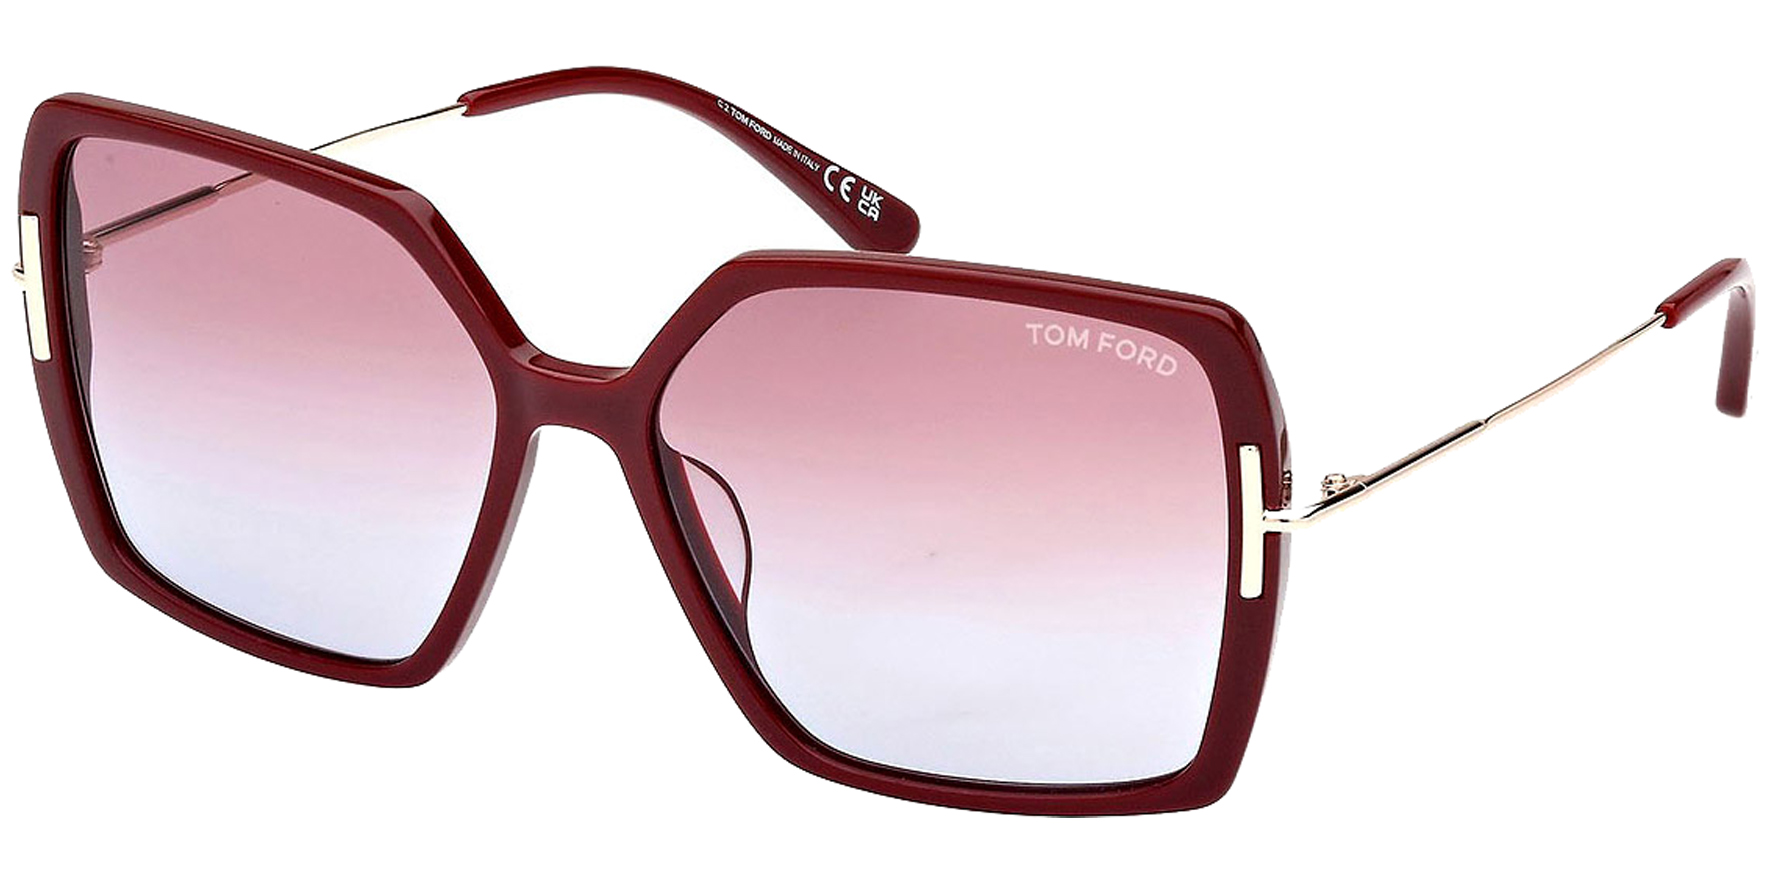 Tom Ford Joanna Shiny Bordeaux Squared Butterfly